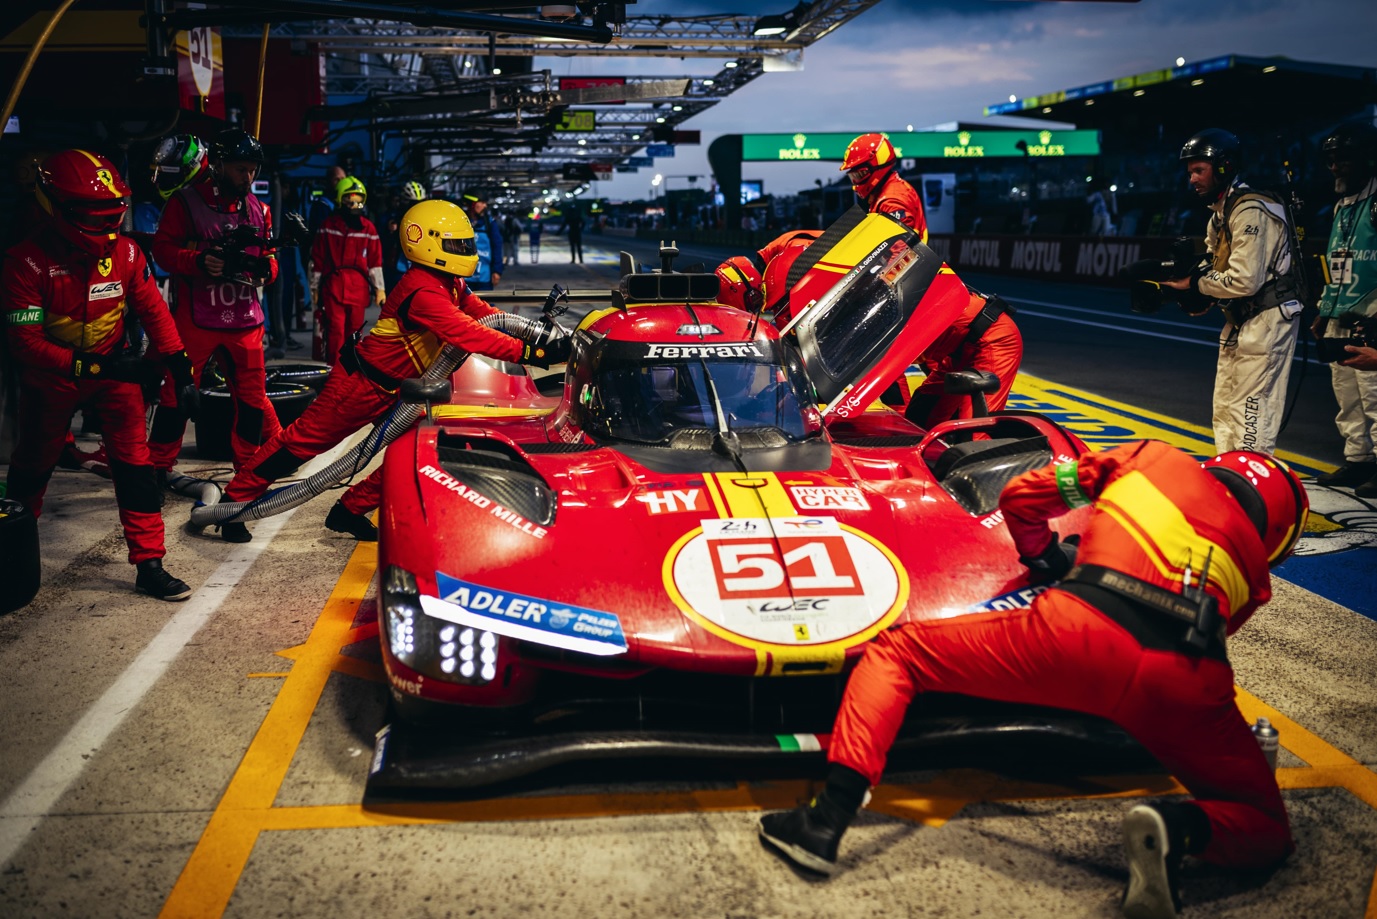 Ferrari 499p Wins On Debut At 24 Hours Of Le Mans 06